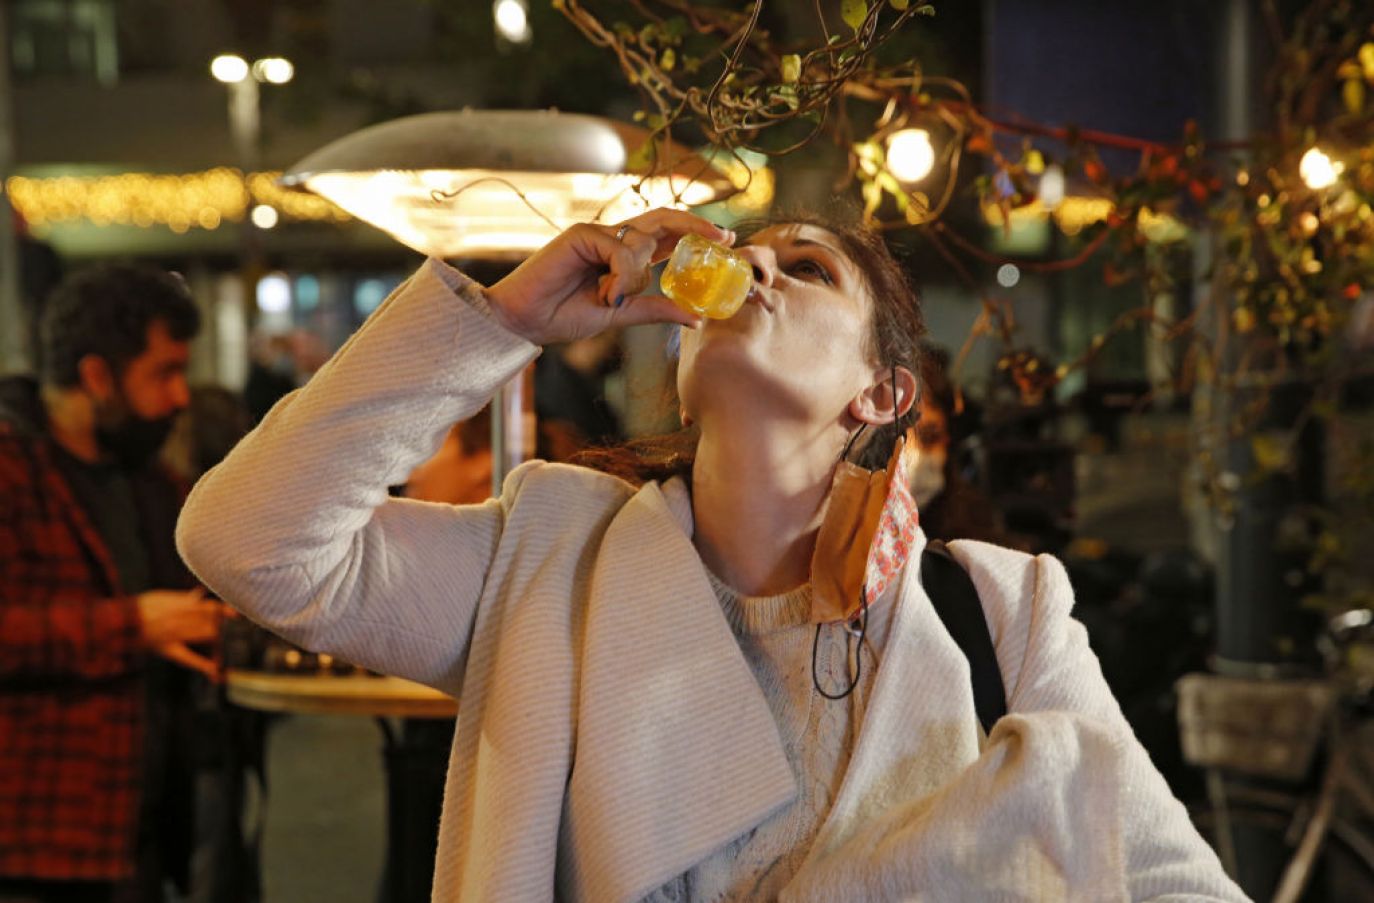 An Israeli Woman Takes A Shot After Receiving Her Covid Vaccine At The Tel Aviv Bar. Photo: Gil Cohen-Magen/Afp Via Getty Images